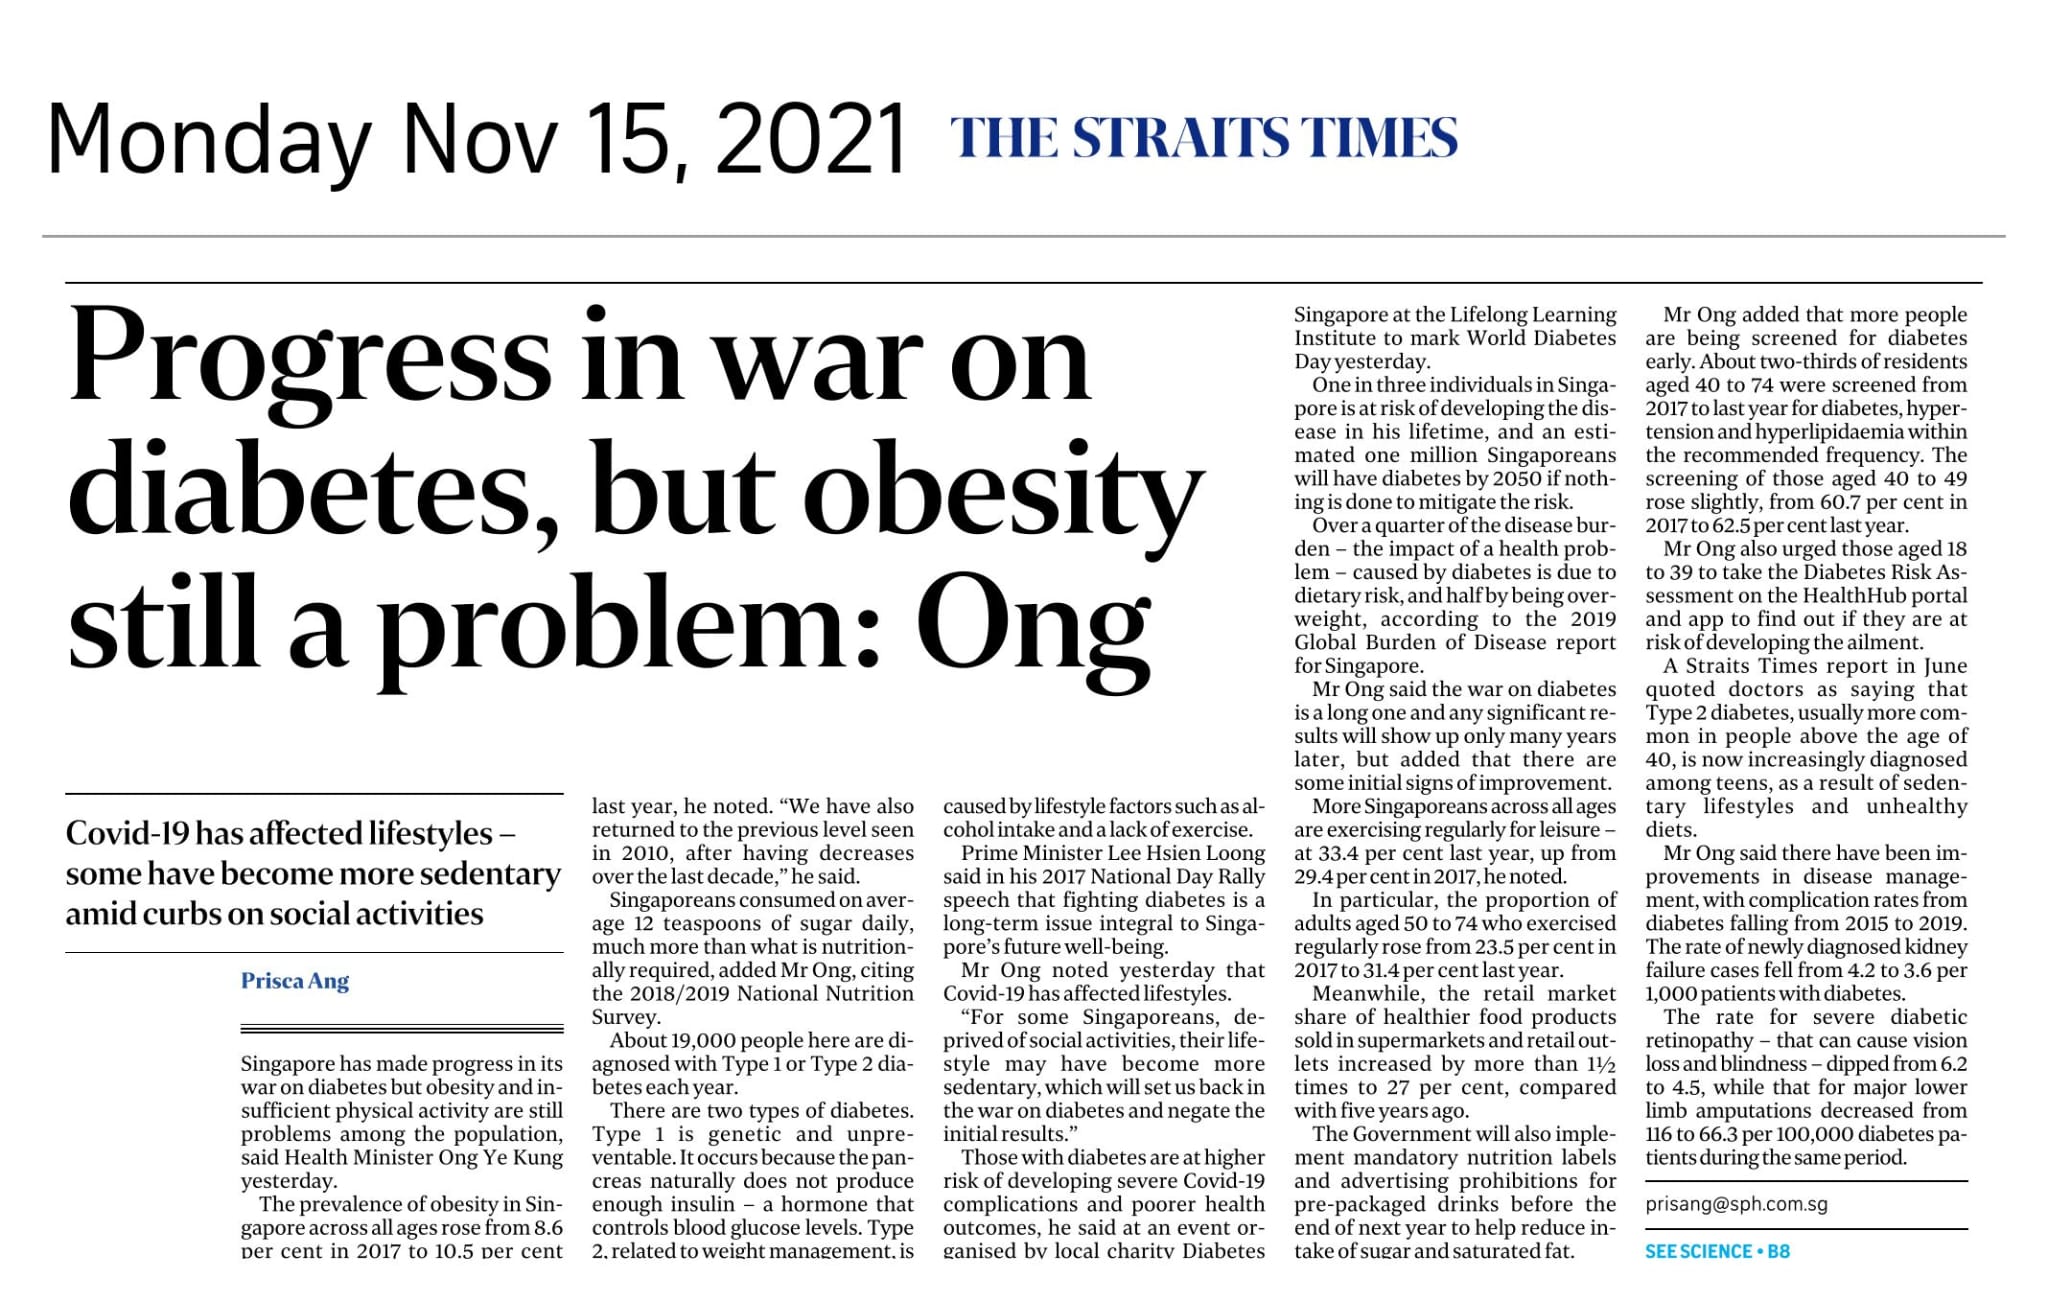 Progress in War on Diabetes, but Obesity Still a Problem: Ong - Published in The Straits Times Nov 15, 2021